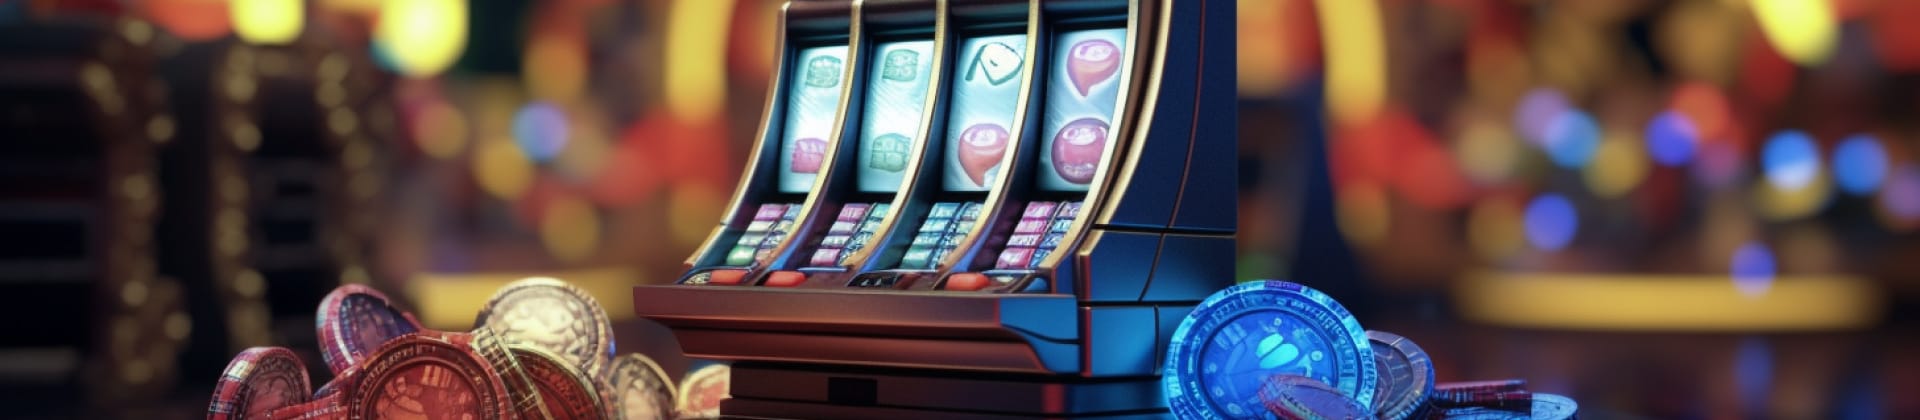 Free spins at litecoin casinos are common